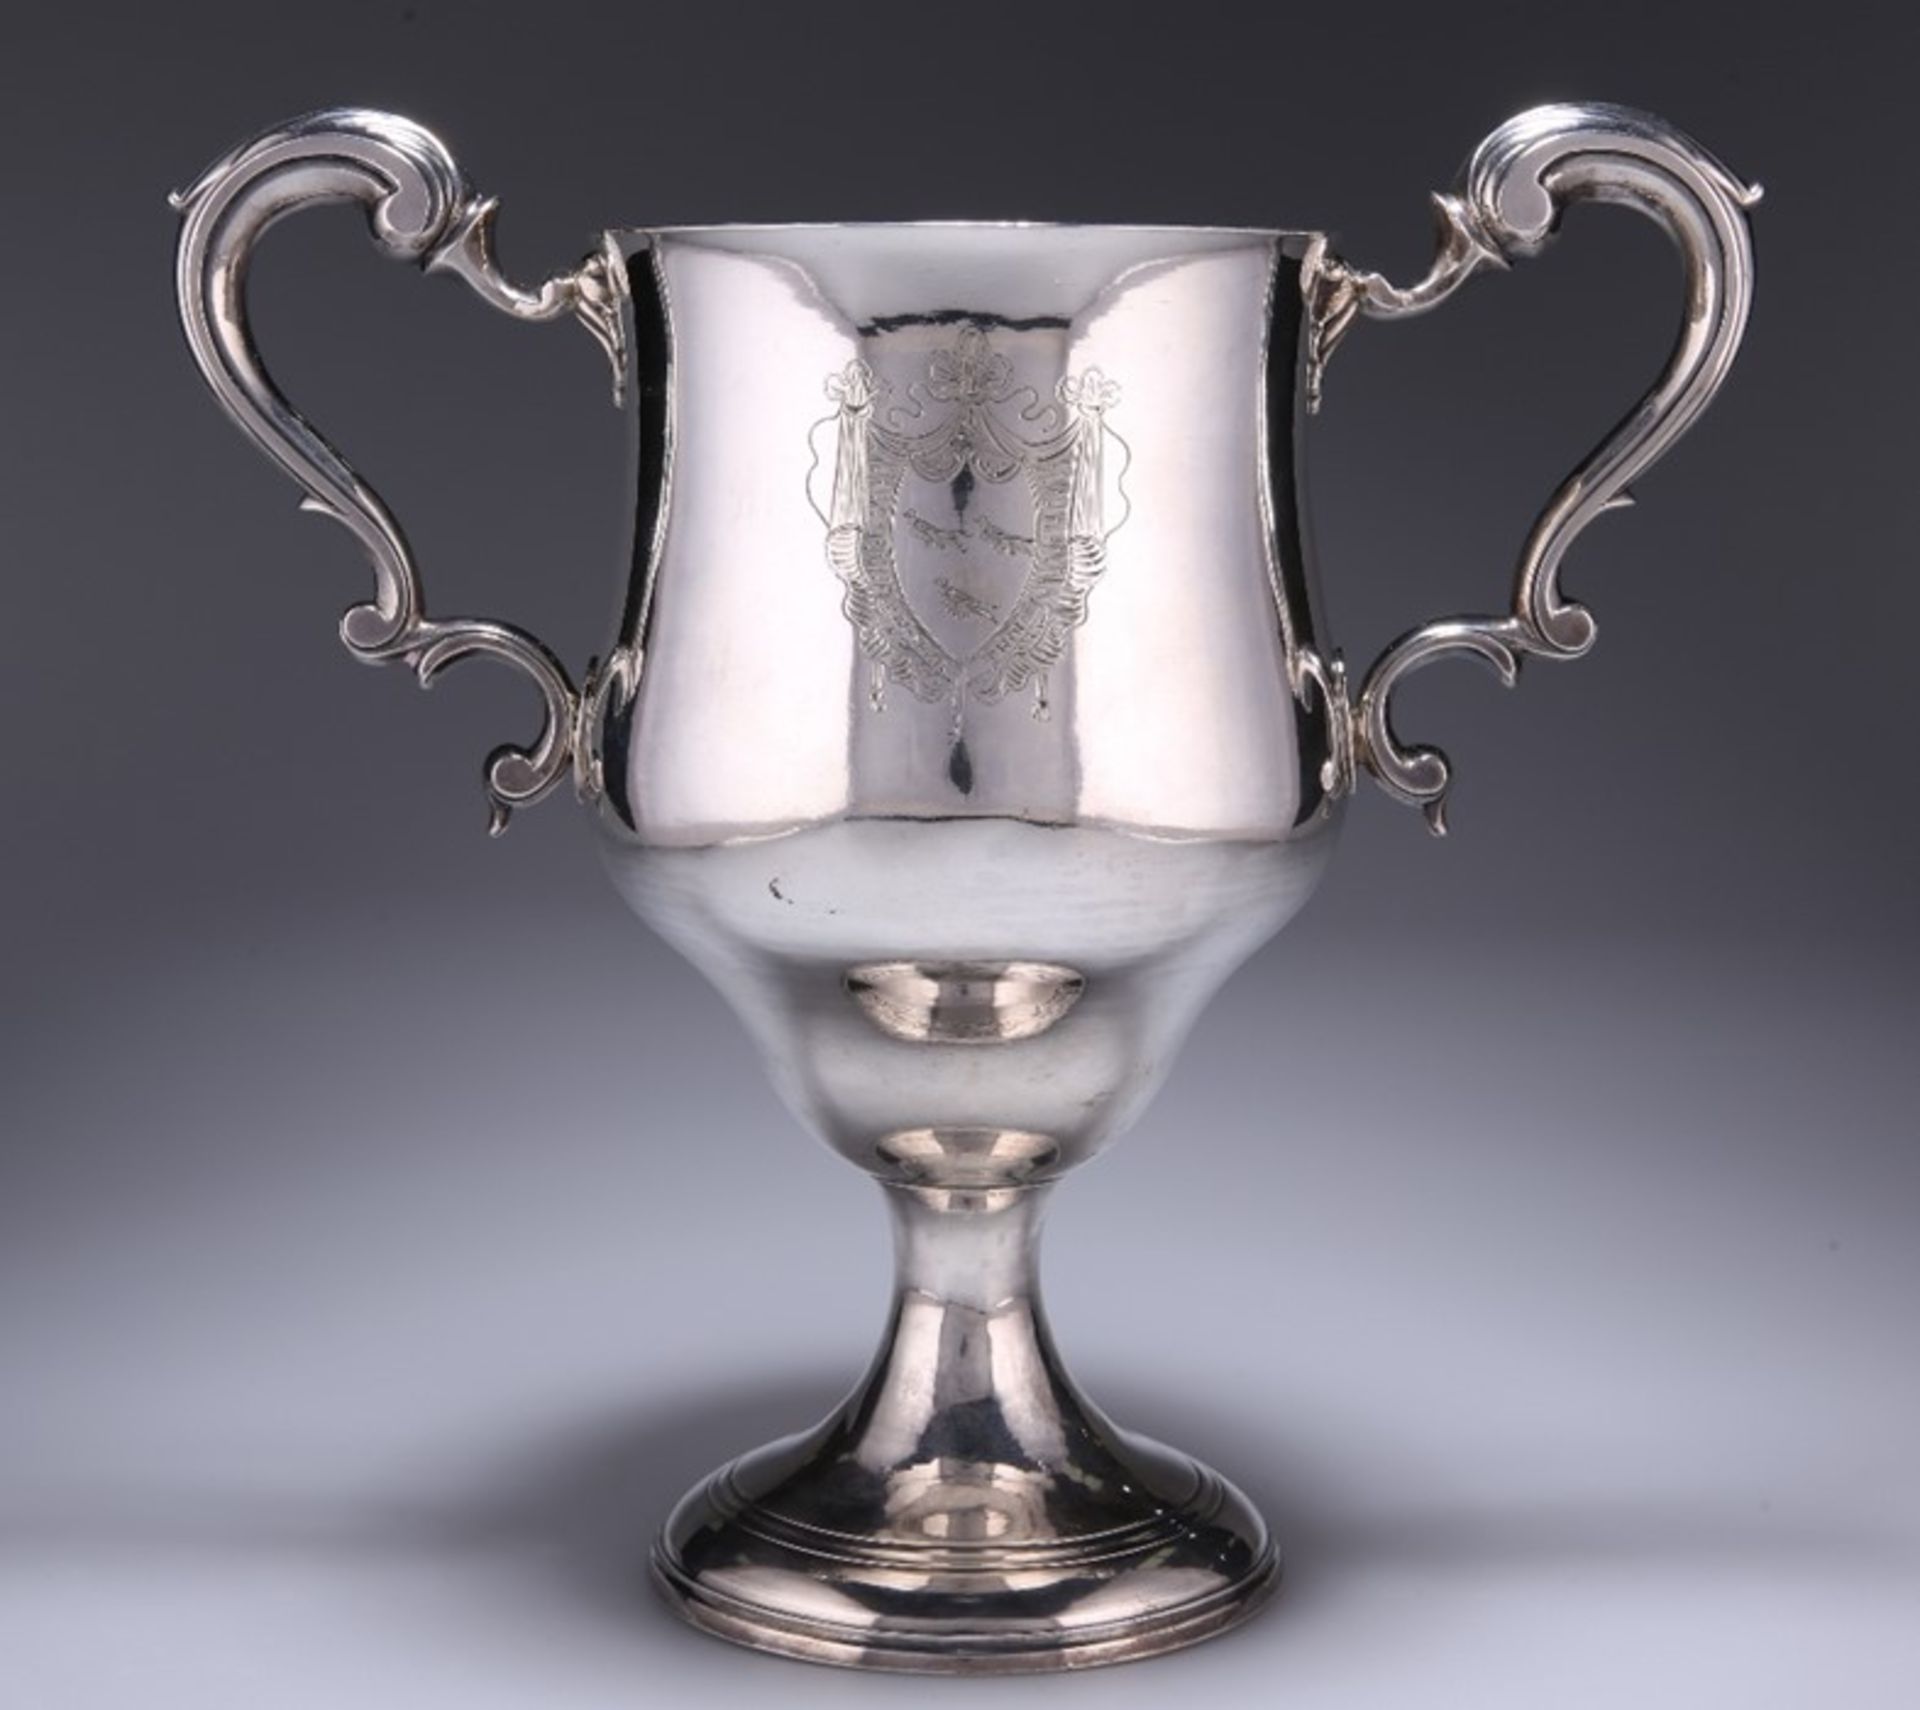 A LARGE GEORGE III IRISH SILVER TWO-HANDLED CUP